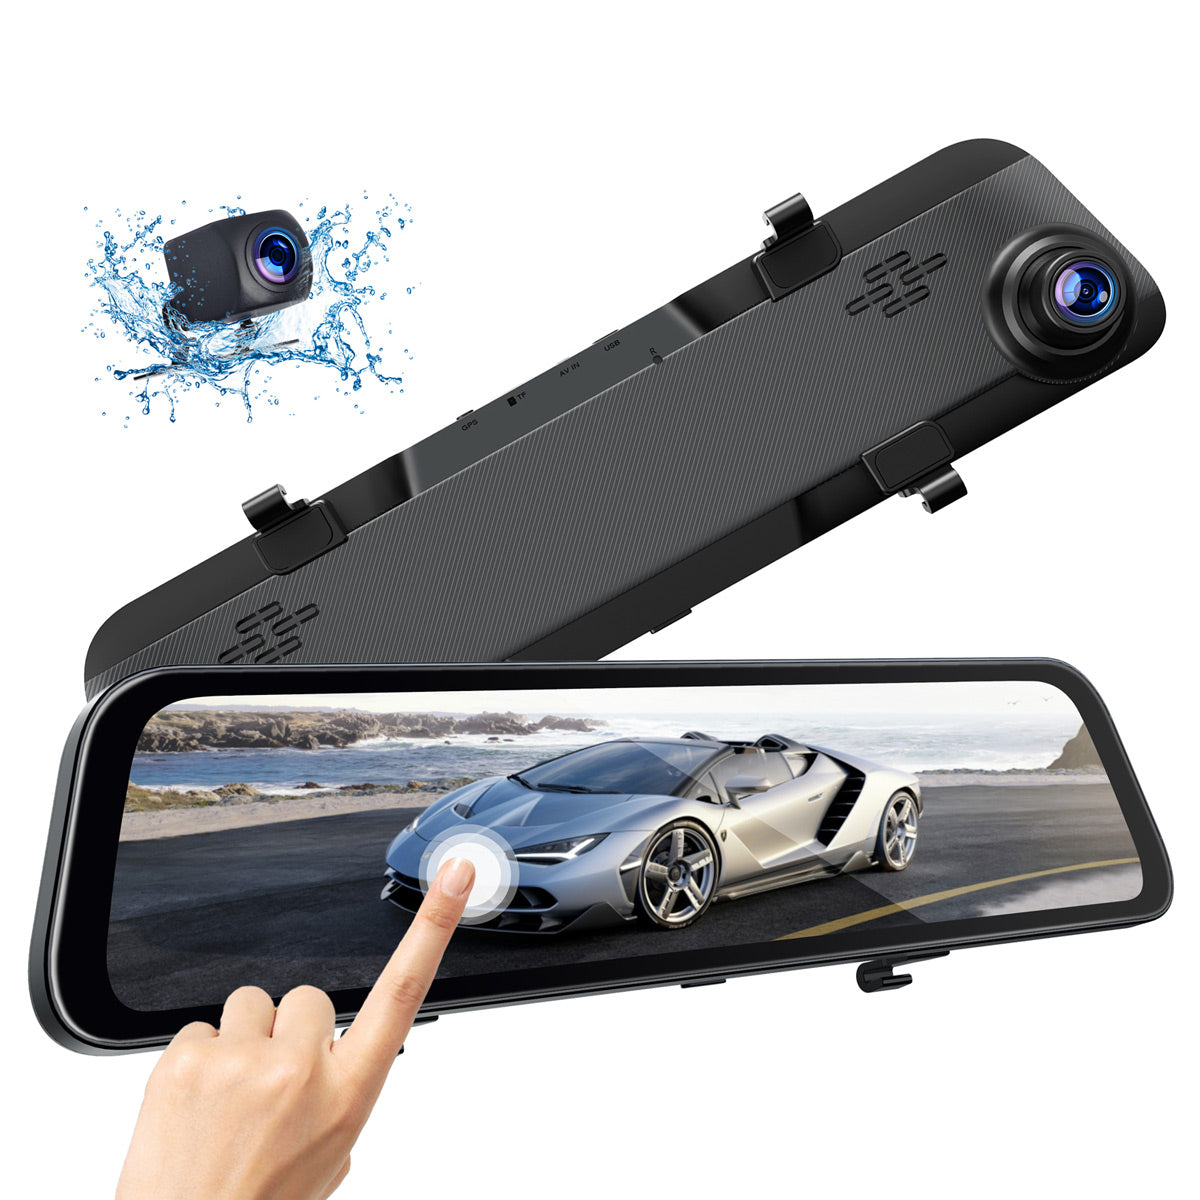 Campark CE70 2.5K 12 Front and Rear Mirror Dash Cam with Voice Control